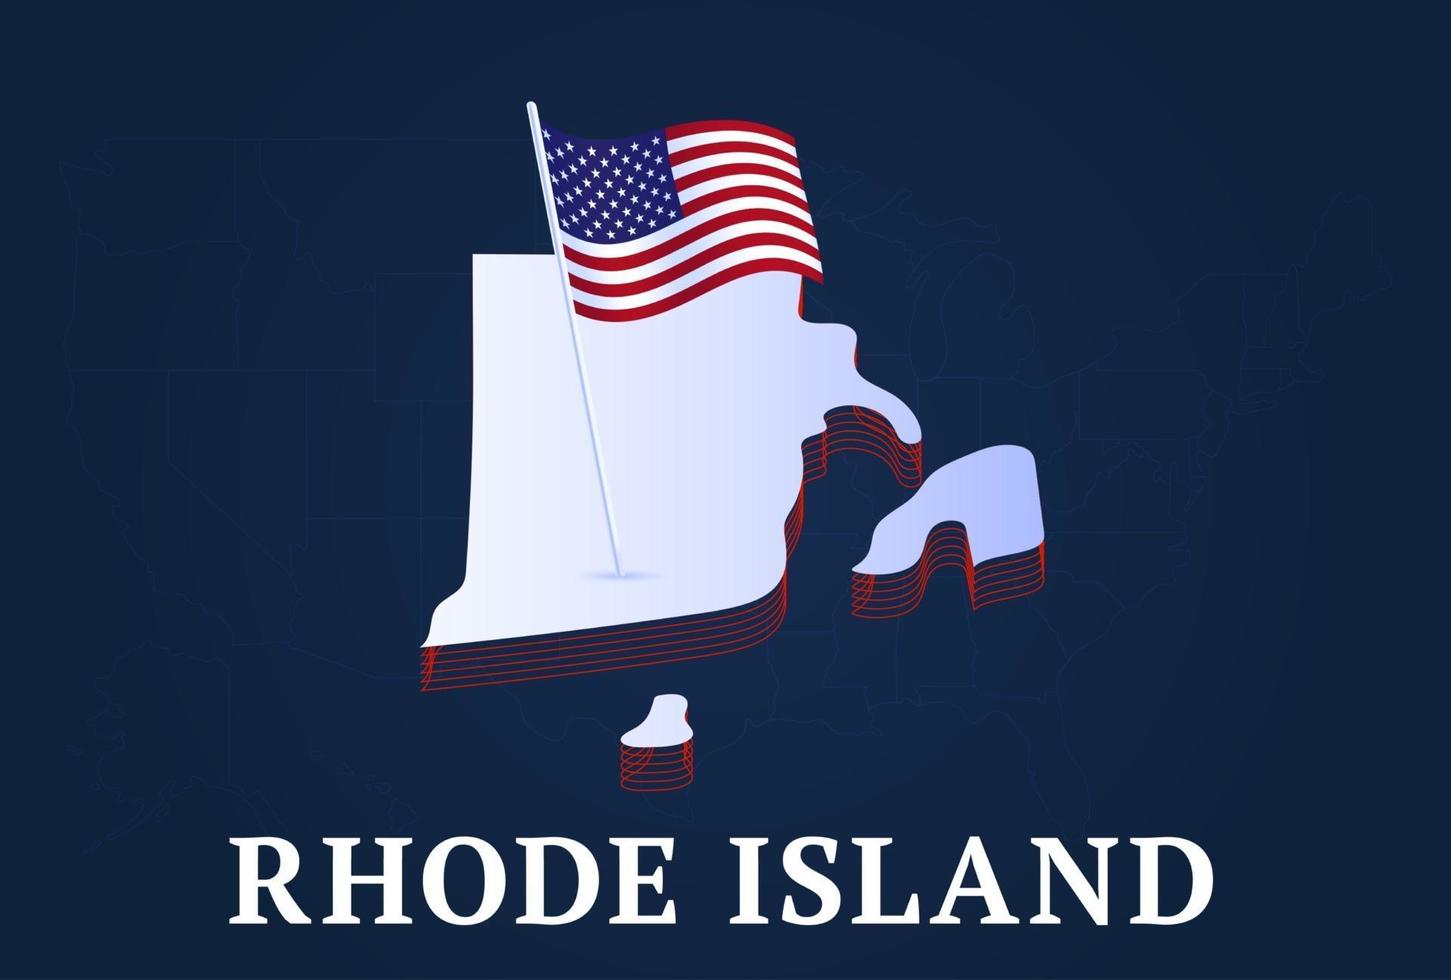 rhode island state Isometric map and USA national flag 3D isometric shape of us state Vector Illustration